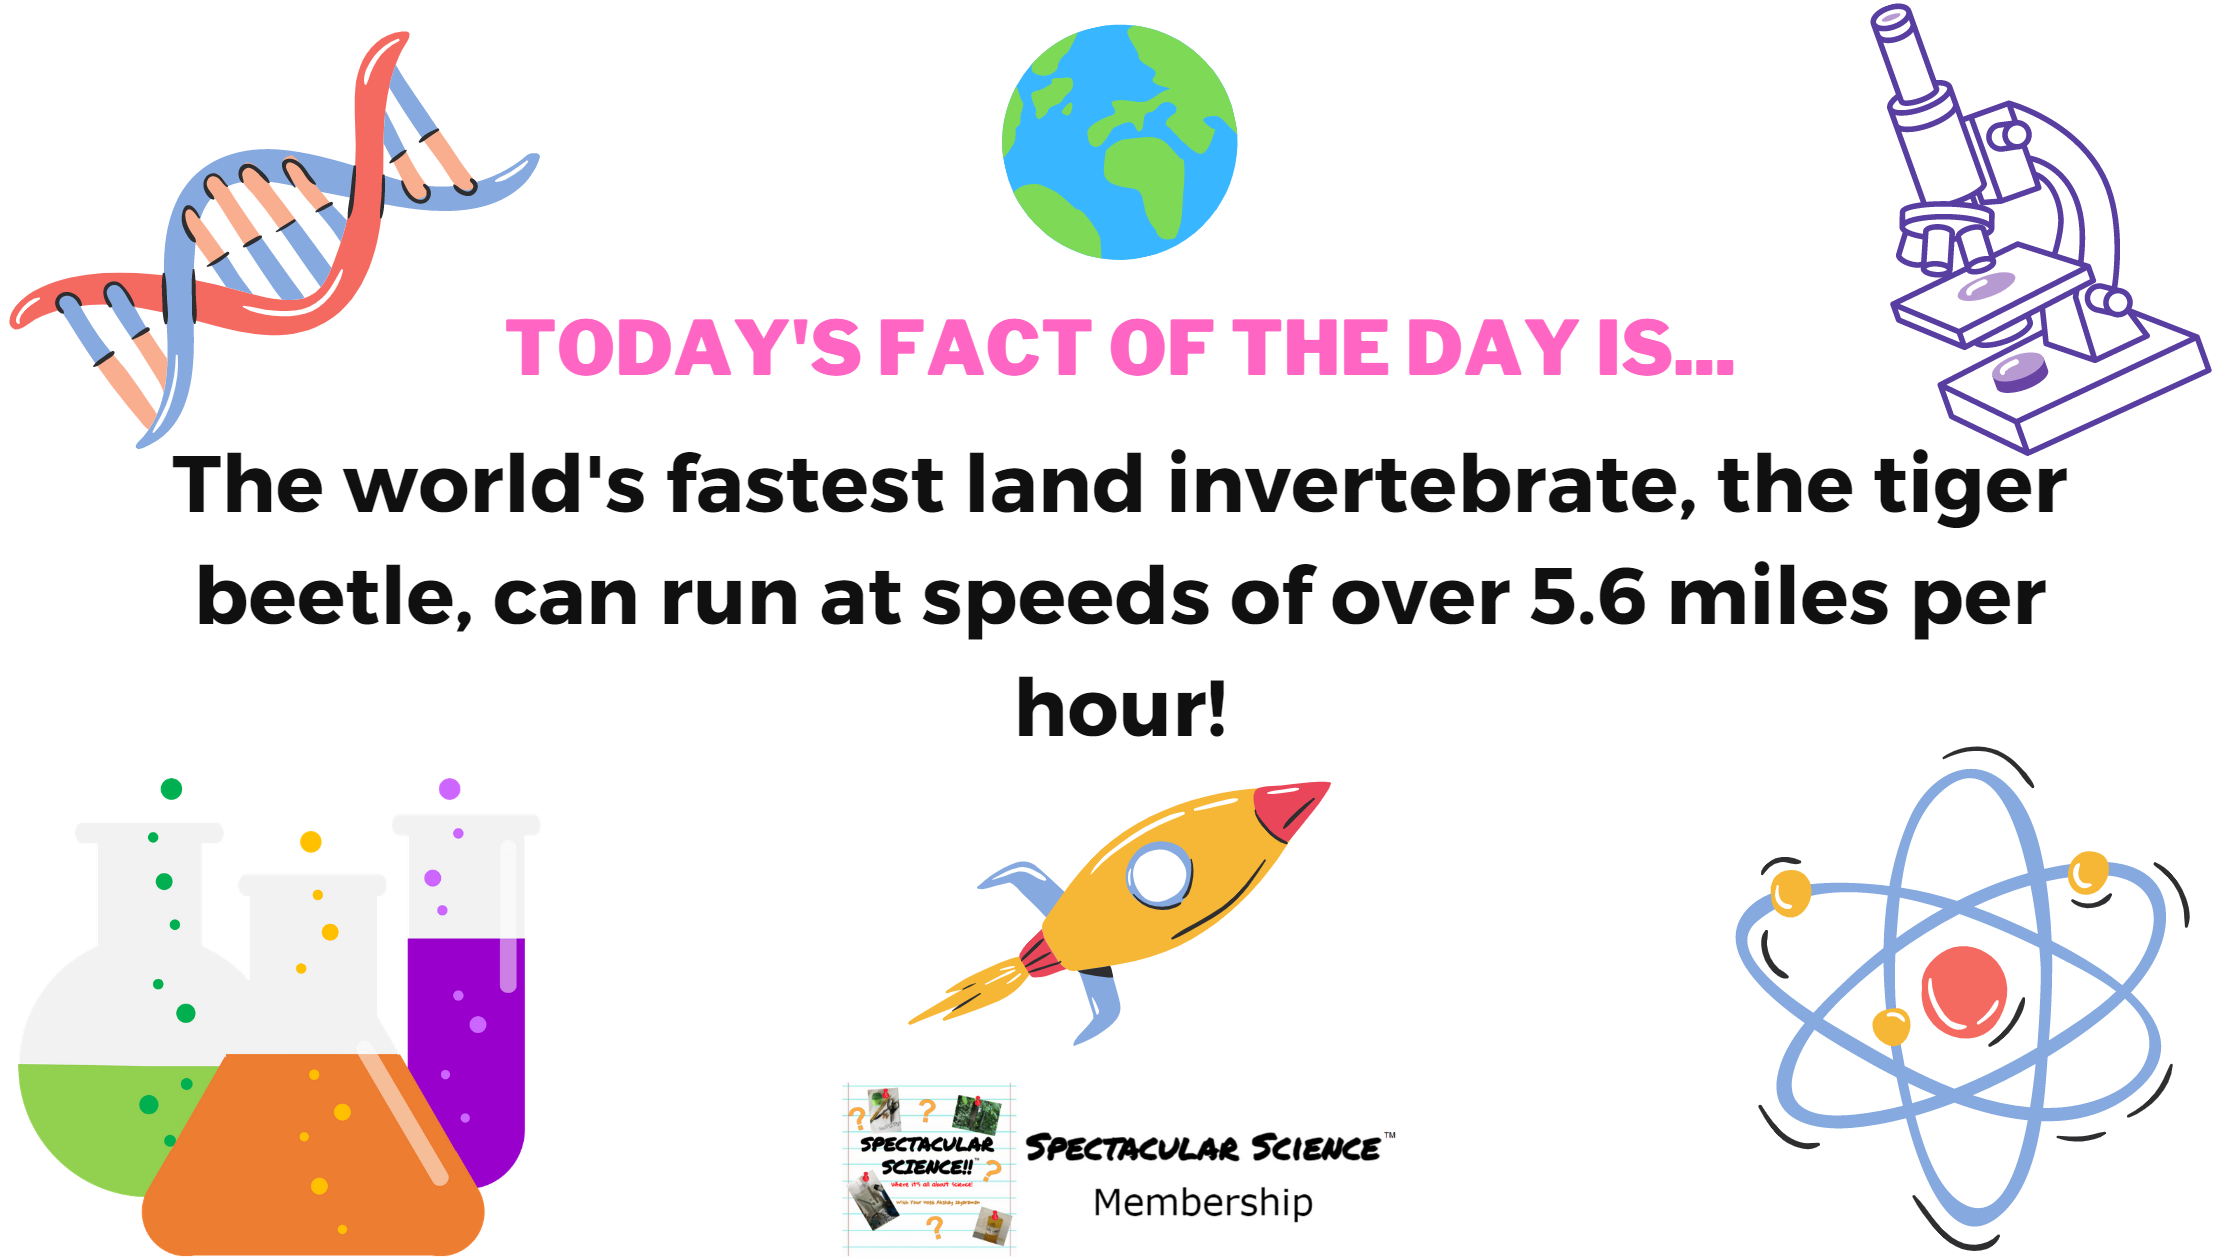 Fact of the Day Image March 19th